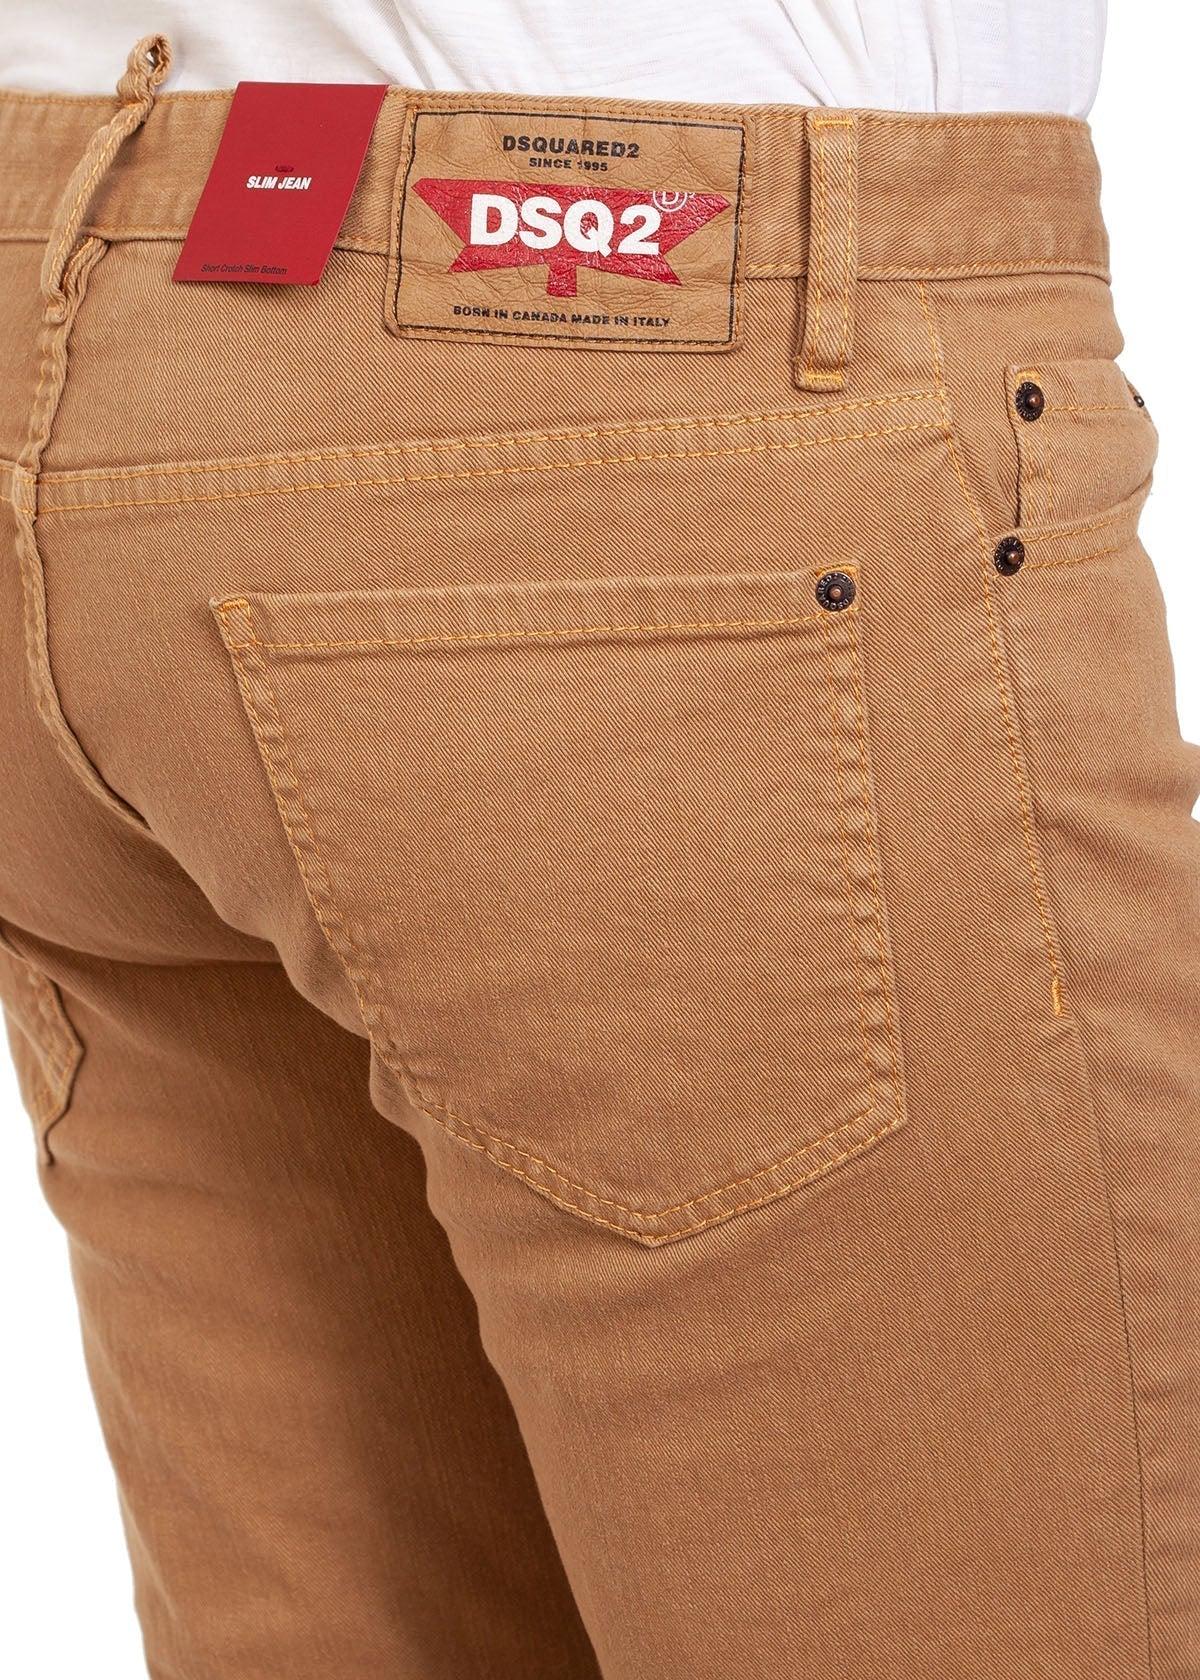 for Men Mens Jeans DSquared² Jeans DSquared² Denim Trousers in Khaki Brown 